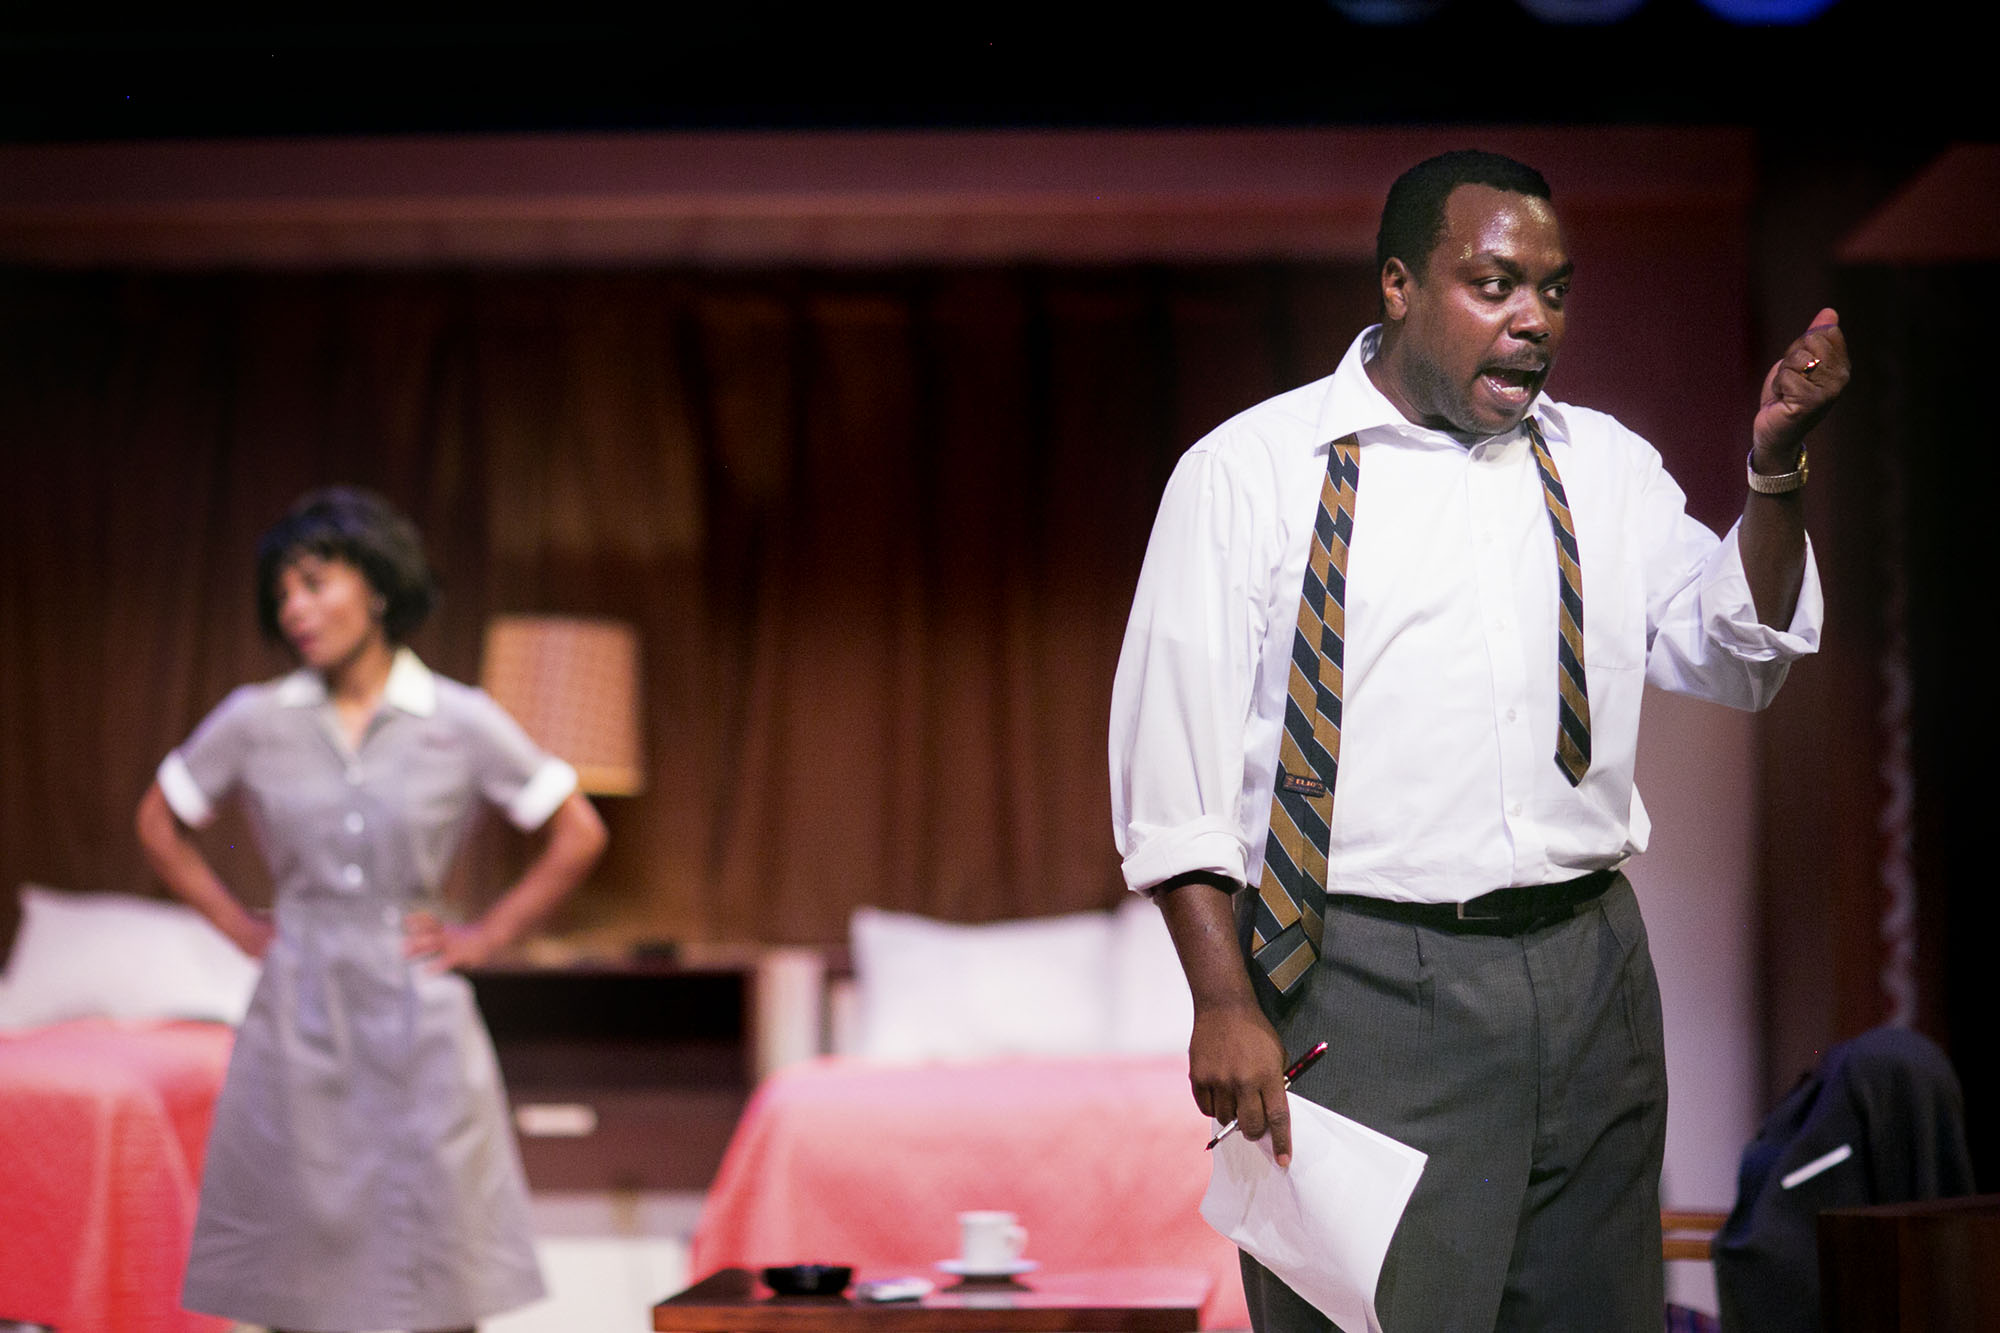 Two cast members rehearsing the play The Mountaintop